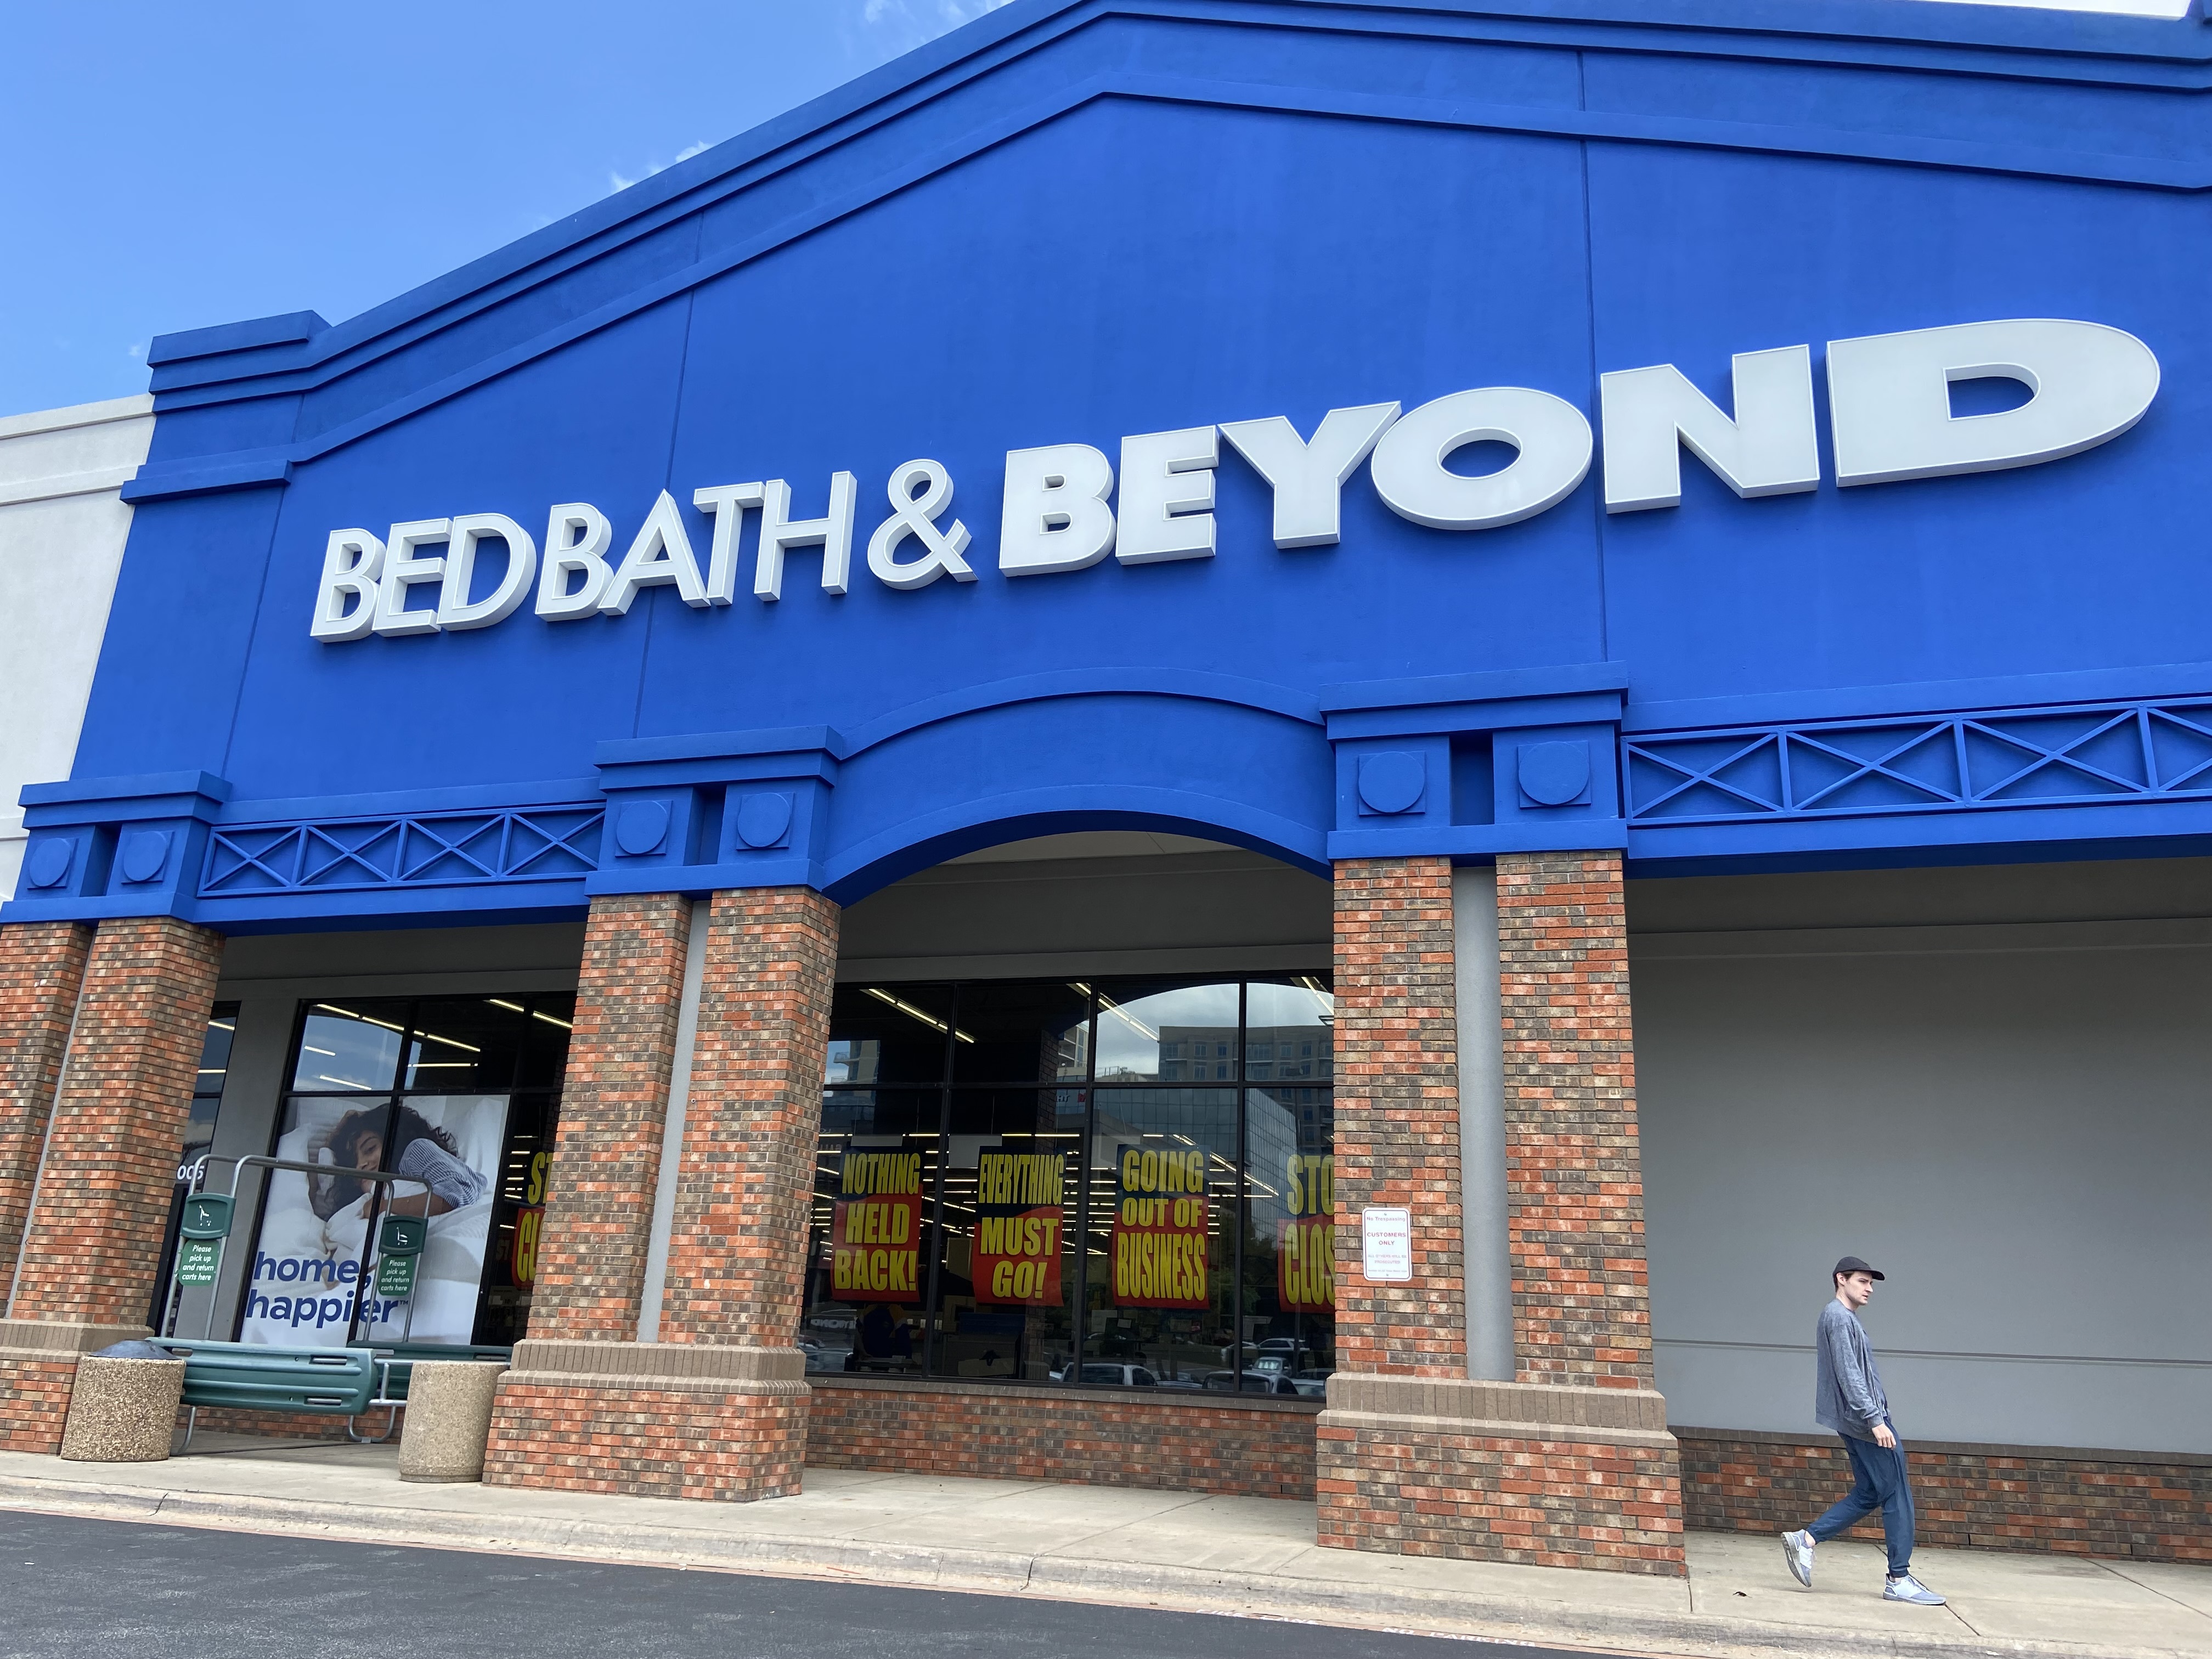 Back to school deals: Save 45% at Bed Bath & Beyond on the Keurig Mini Plus  - Good Morning America